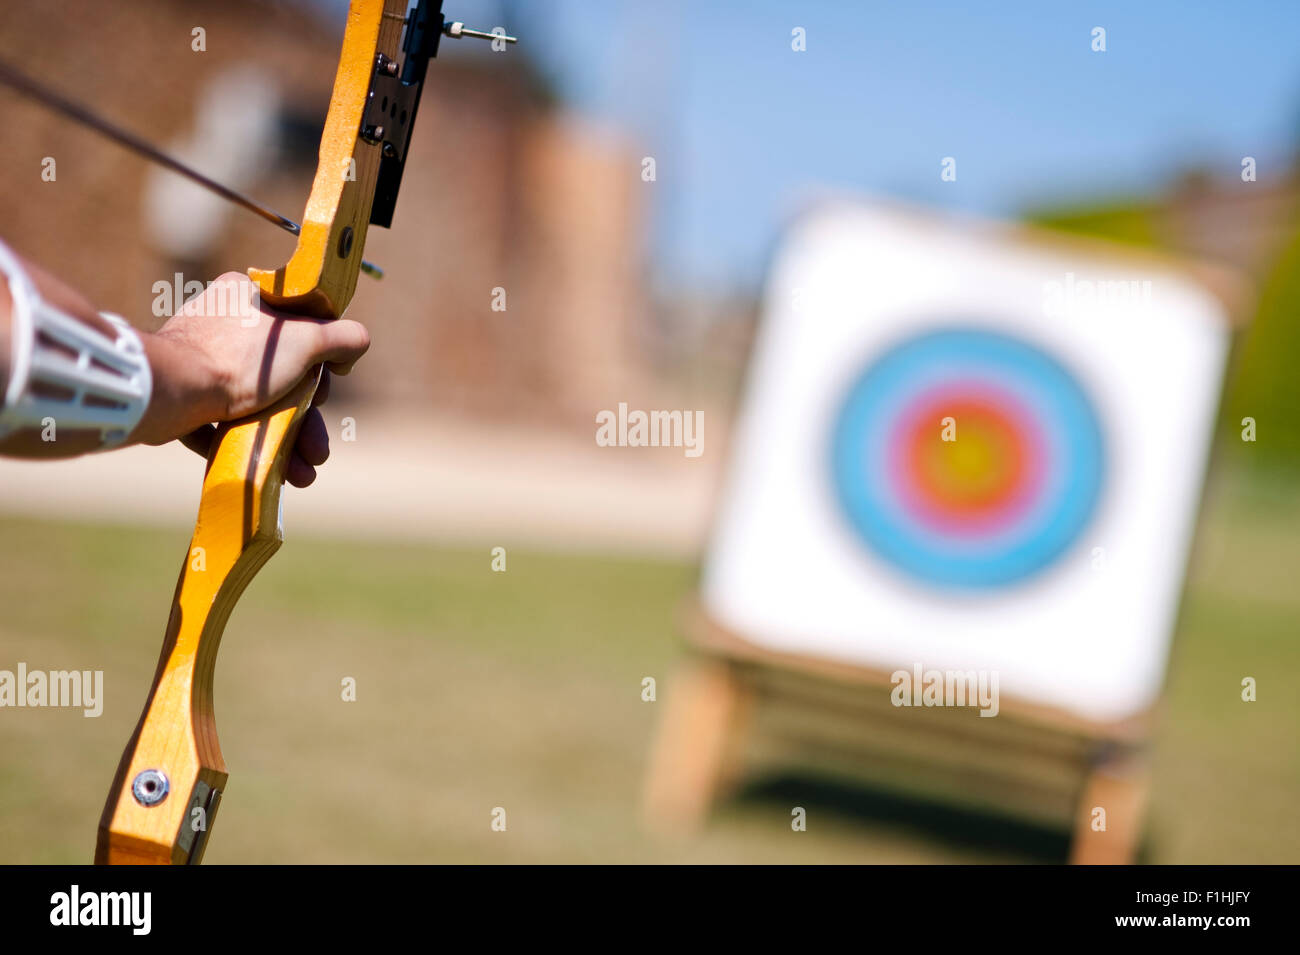 Archer holding a bow aiming at a target. Archery and target. Accuracy, concentration, focus, control, steady, competition, dedication and victory Stock Photo